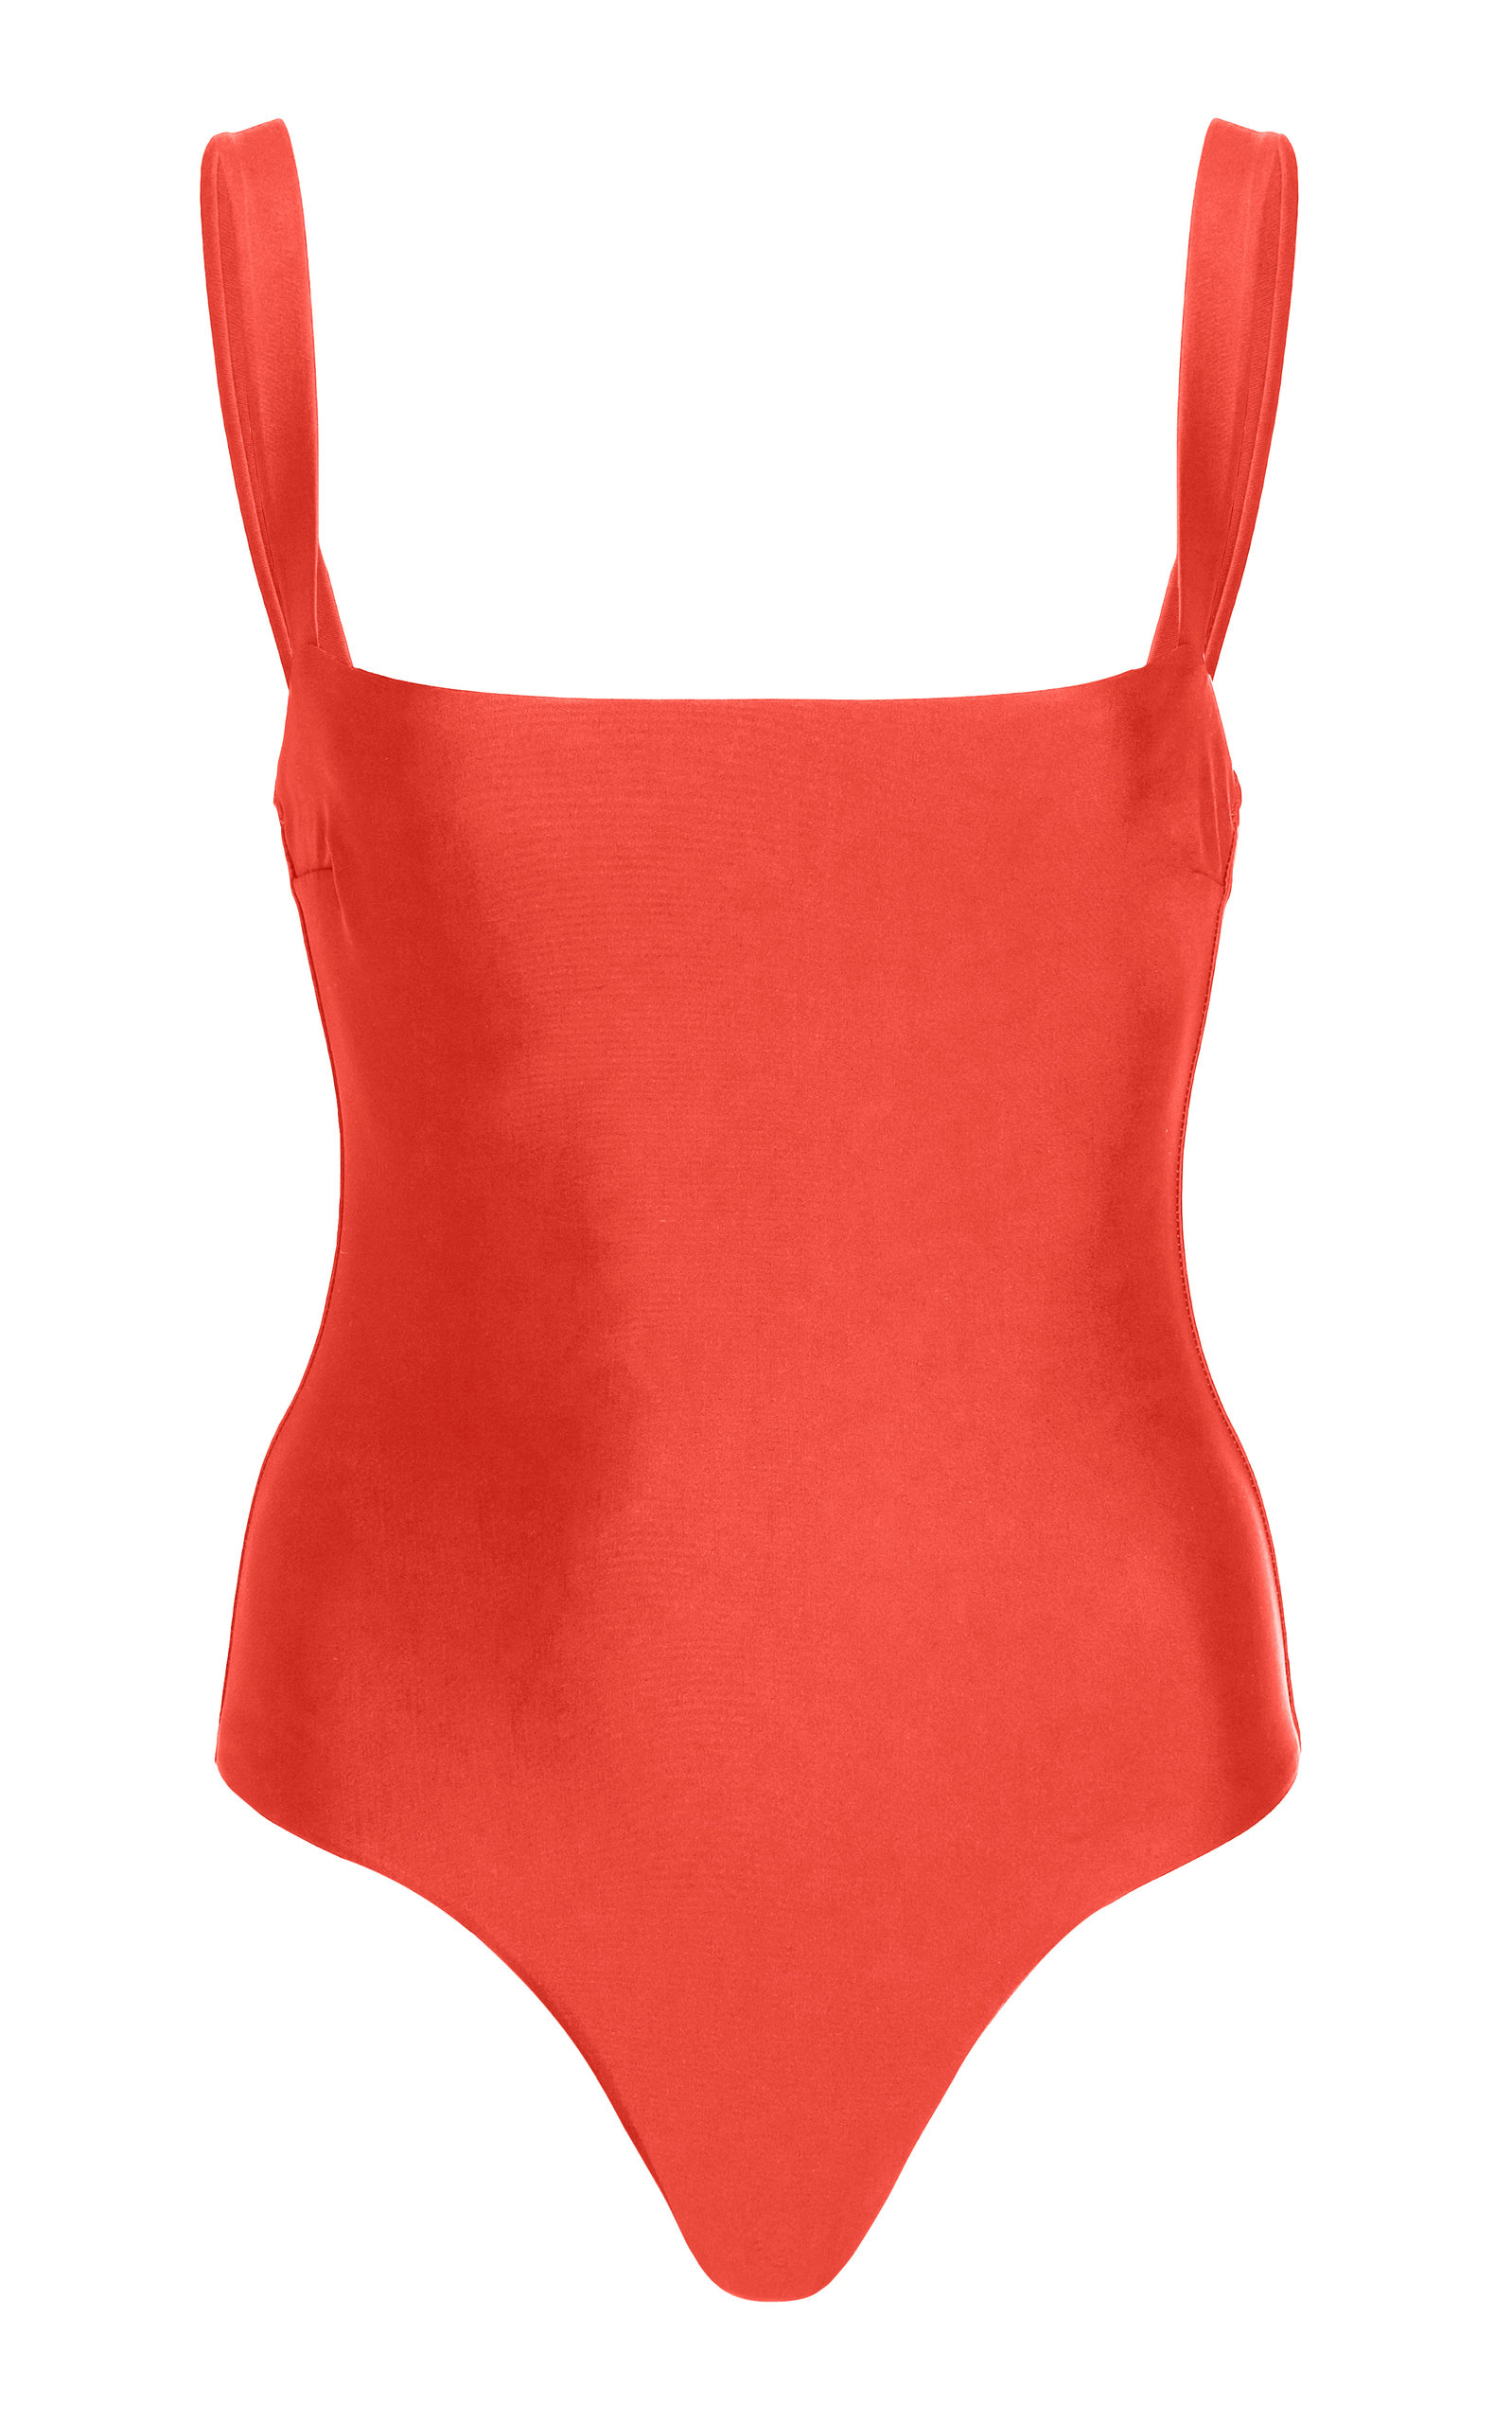 Matteau Women's Square-neck One-piece Swimsuit In Red,white